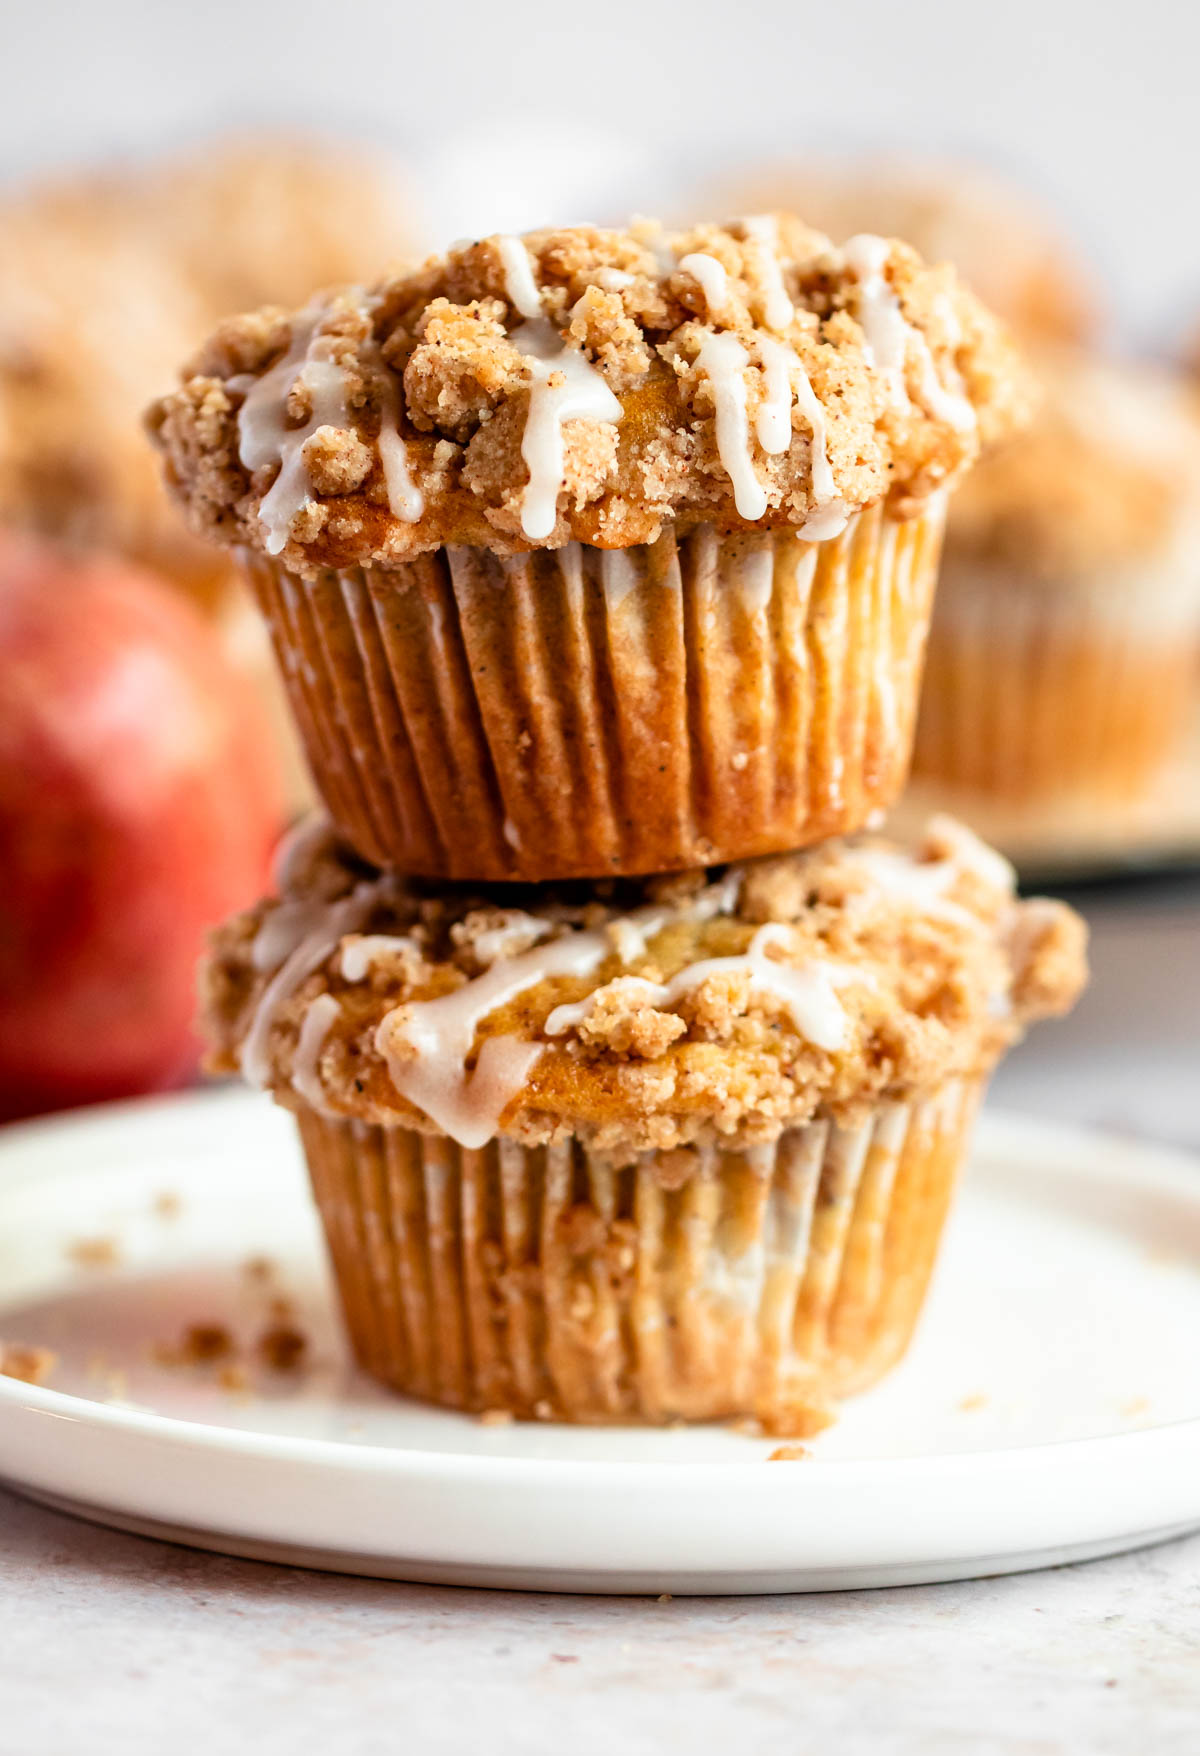 Stack of two apple crumble muffins on a plate.